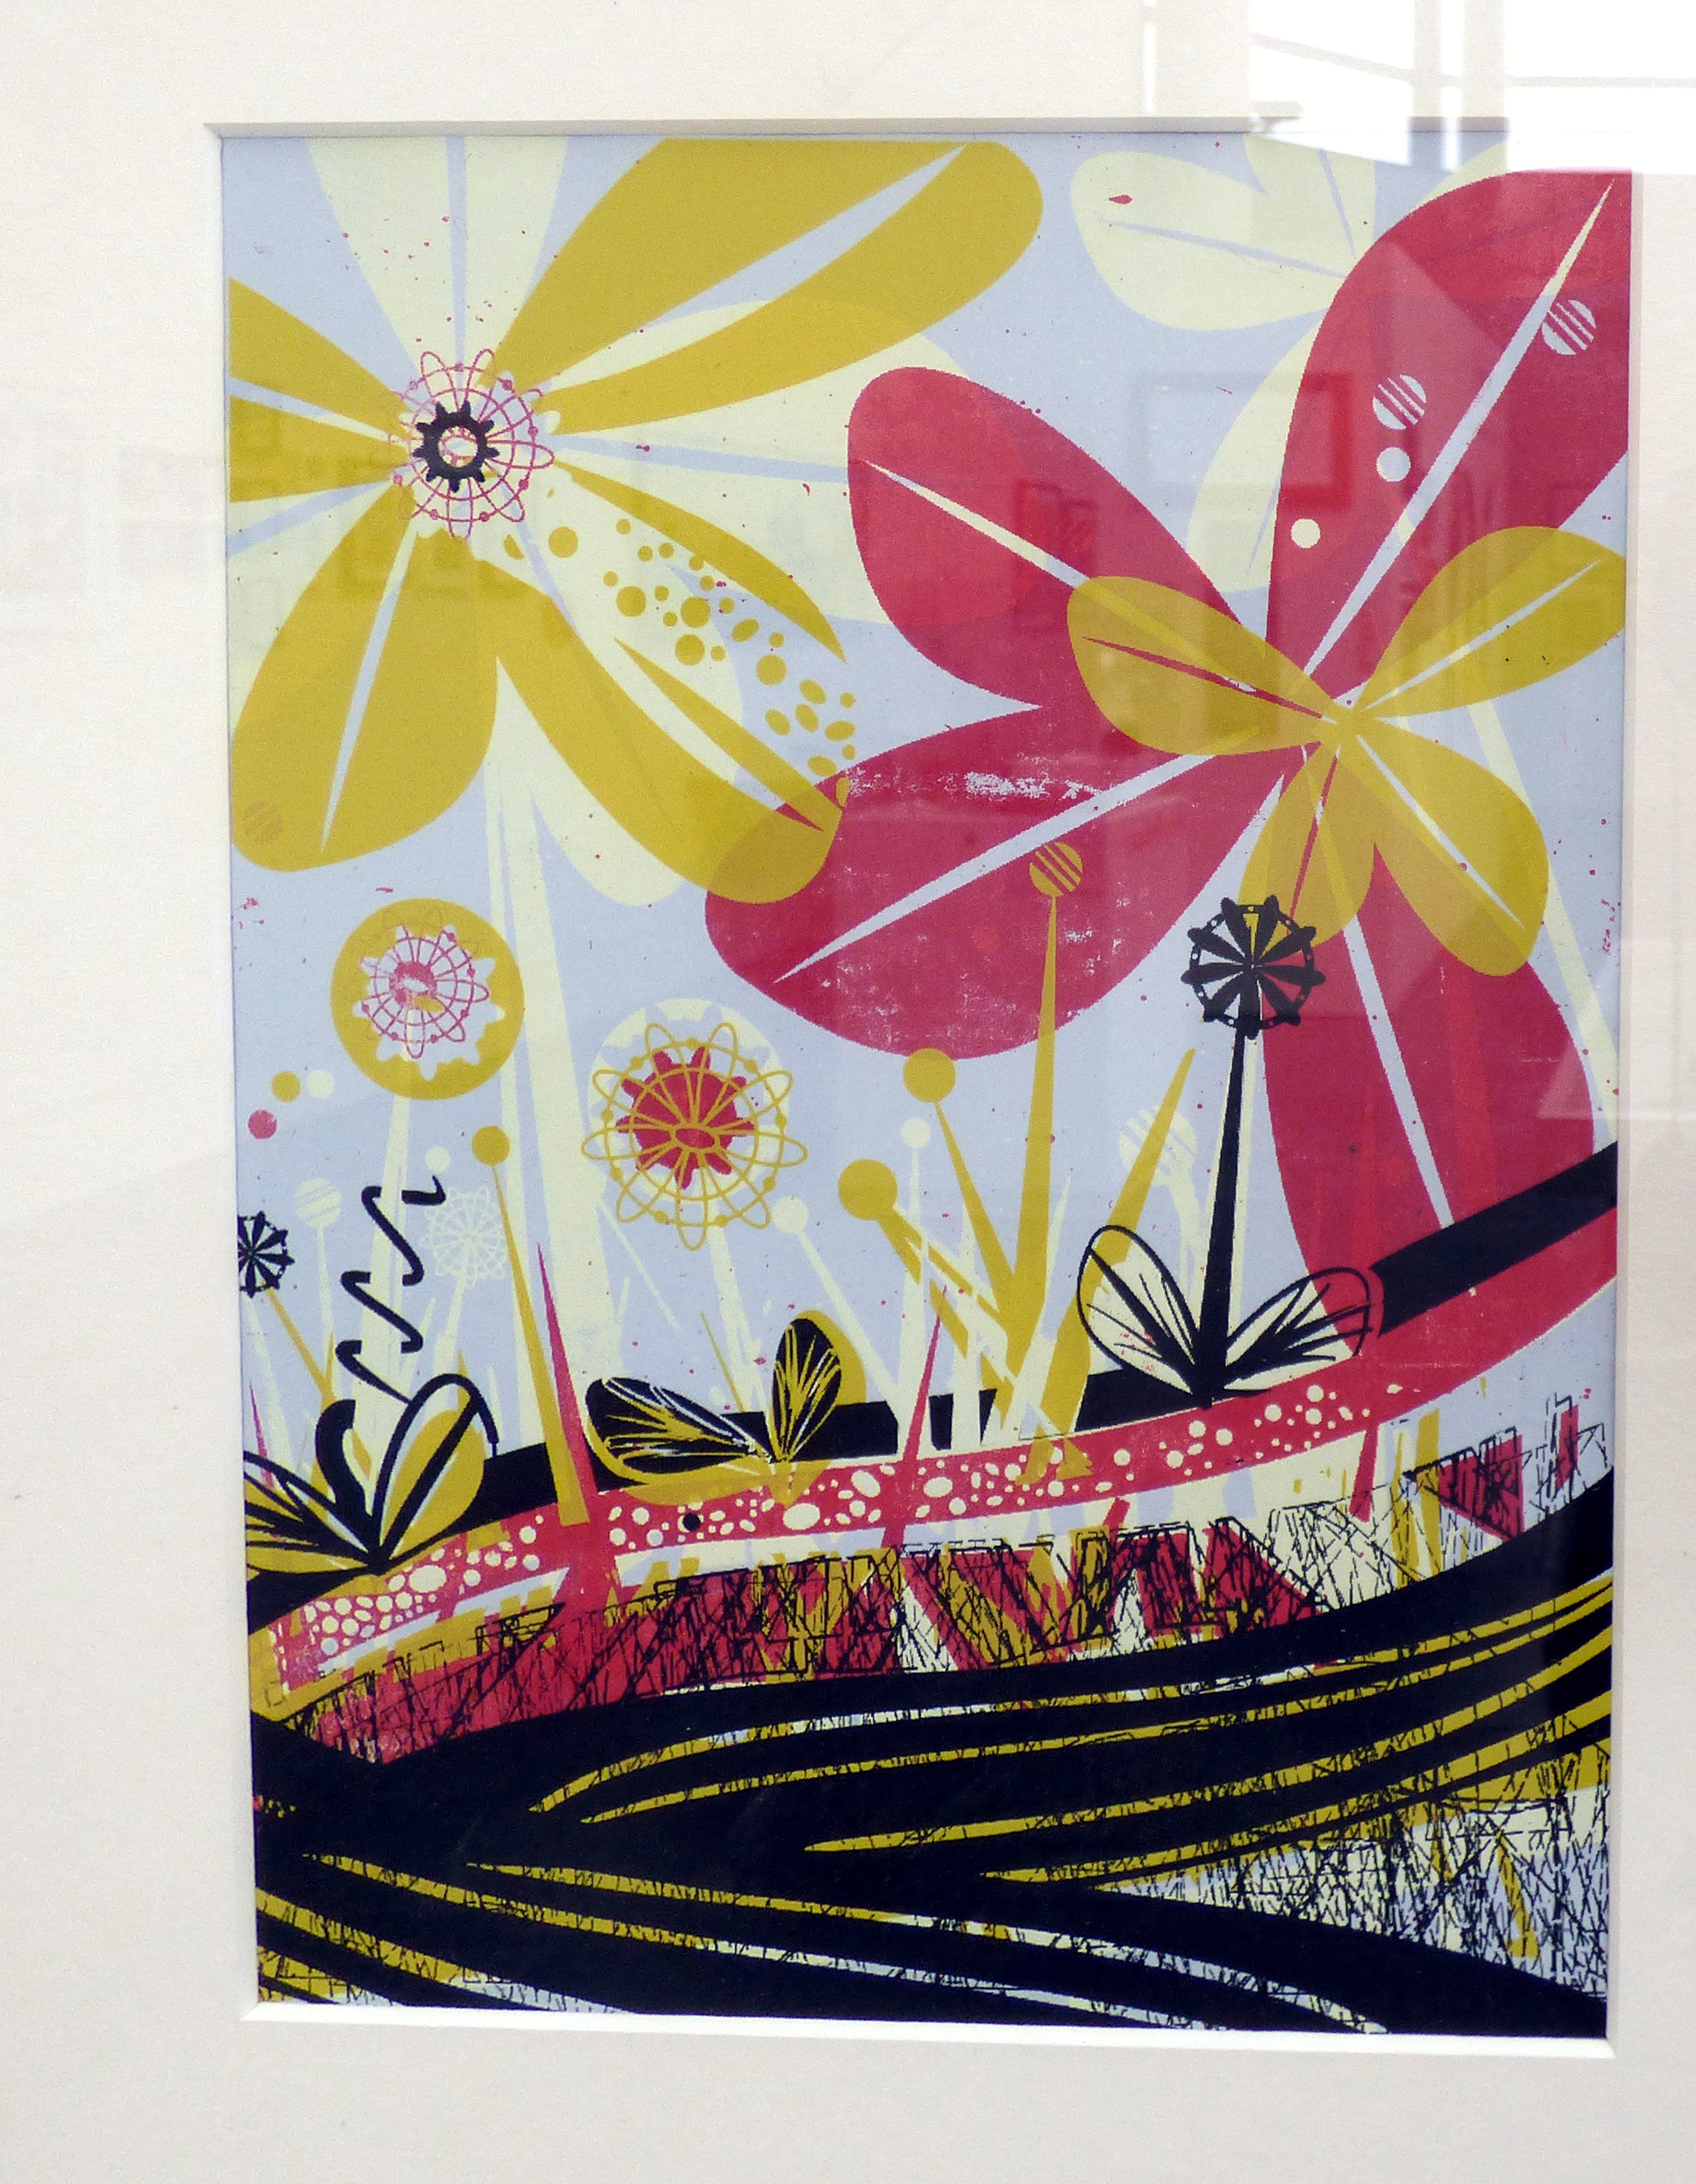 FLOWER GARDEN by Mandy Hills, screen print, CRAFTED exhibition, Huyton Gallery, 2016